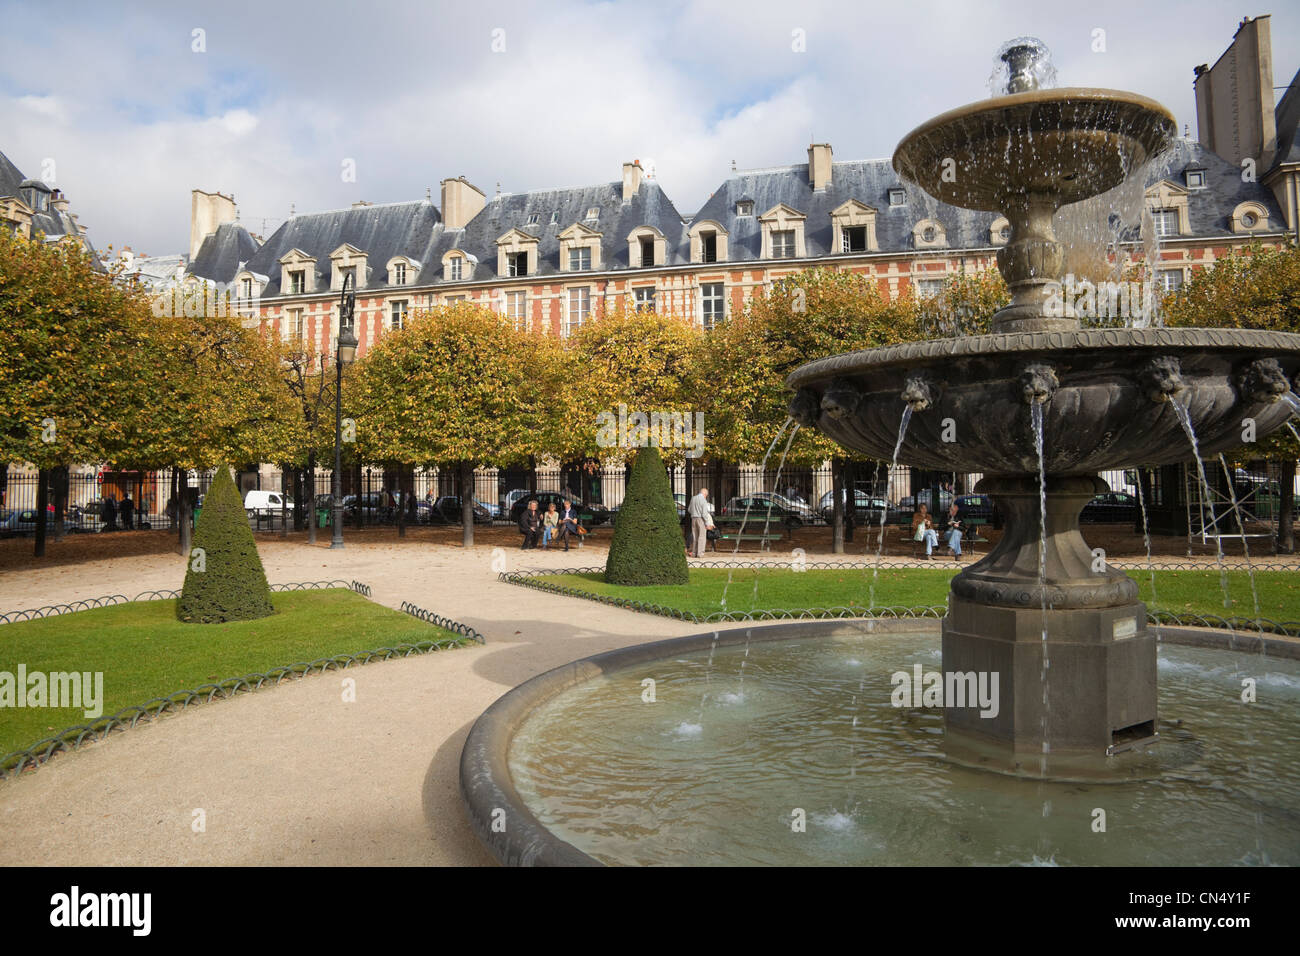 Place de louis xiii hi-res stock photography and images - Alamy